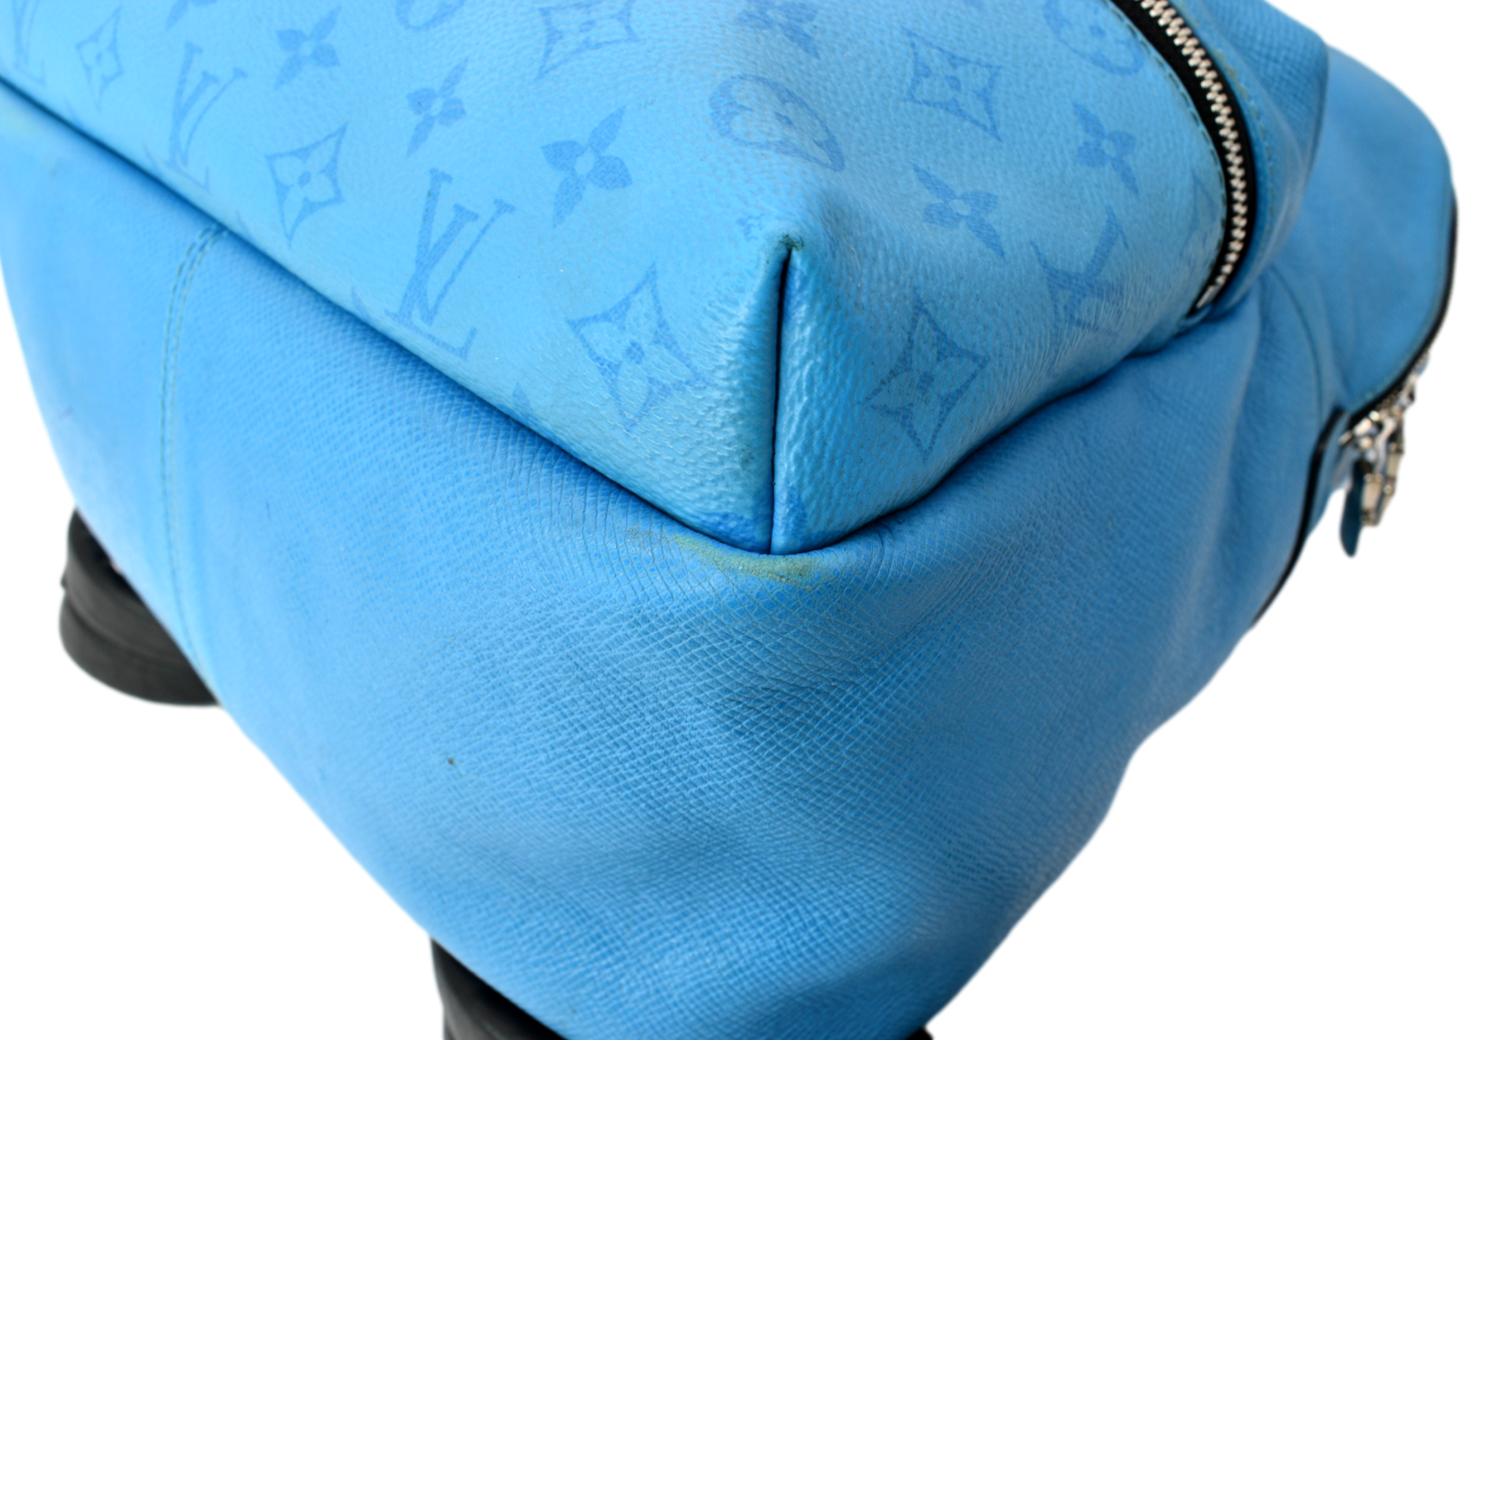 Louis Vuitton Limited Edition Monogram Blue Ink Discovery Backpack